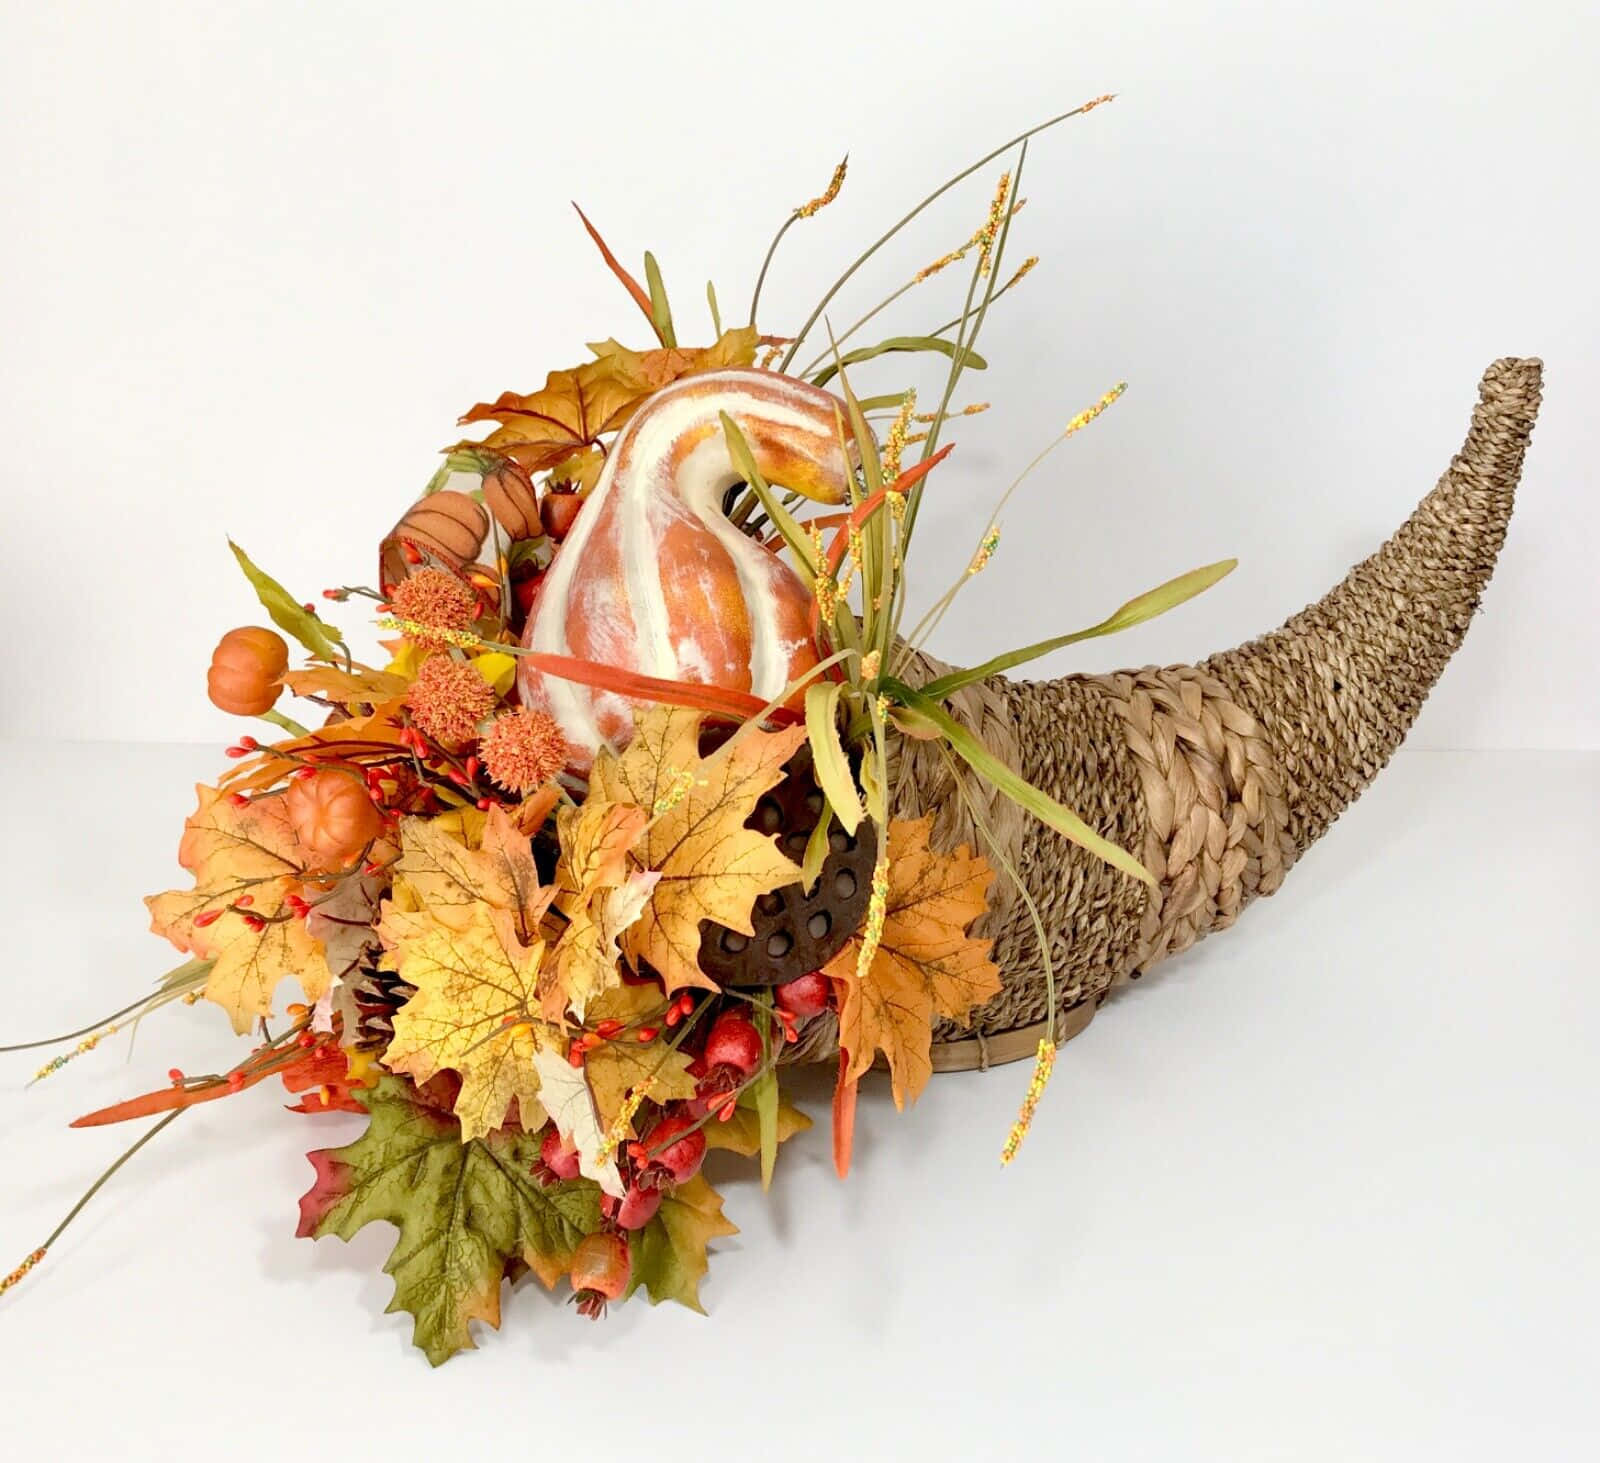 A bountiful Fall Cornucopia overflowing with fruits, vegetables, and flowers. Wallpaper